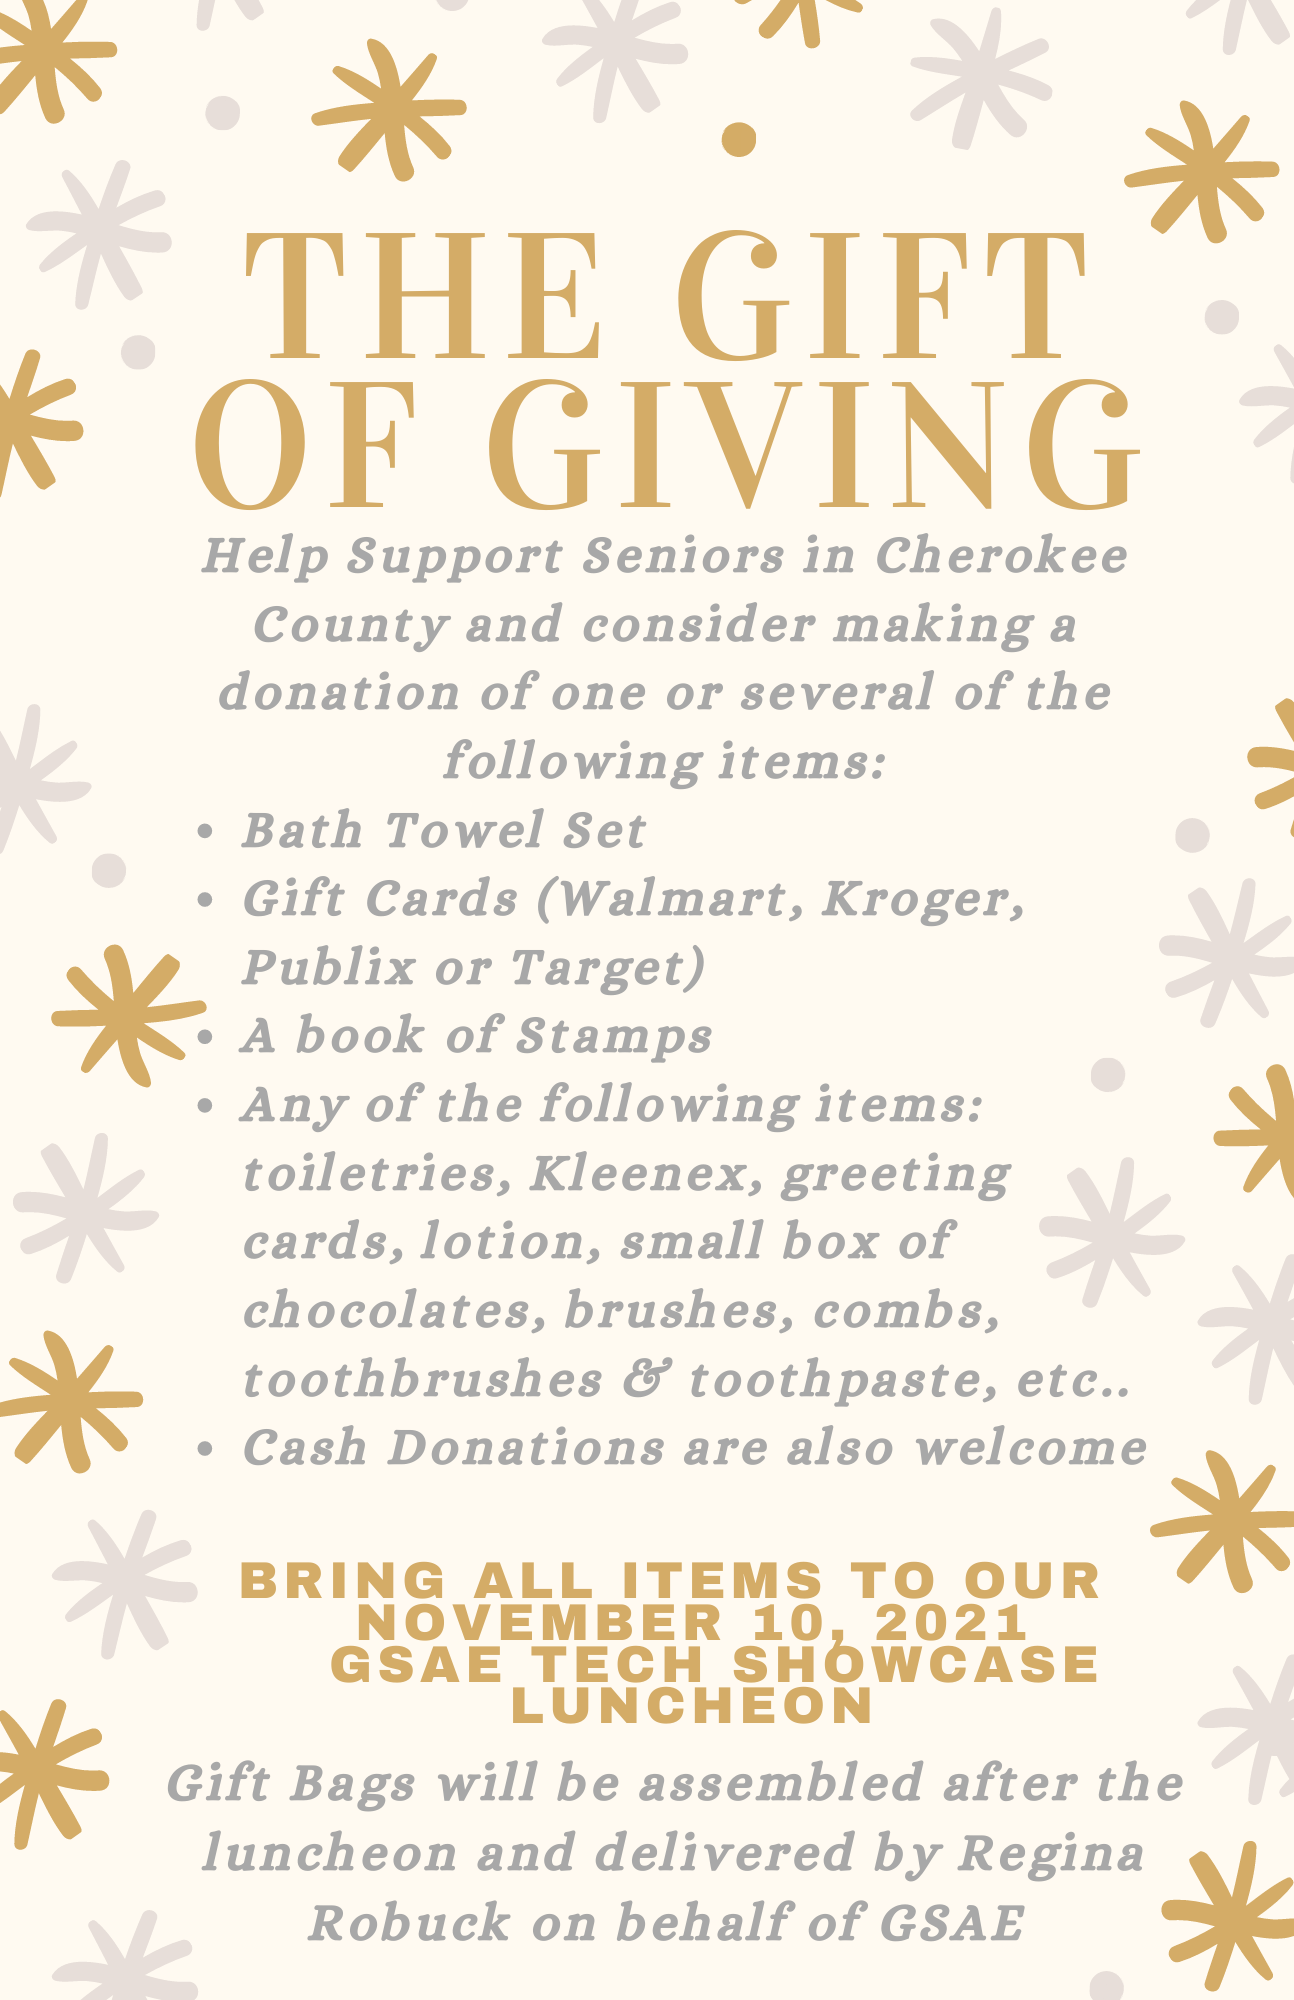 ad to bring donations for seniors in Cherokee county